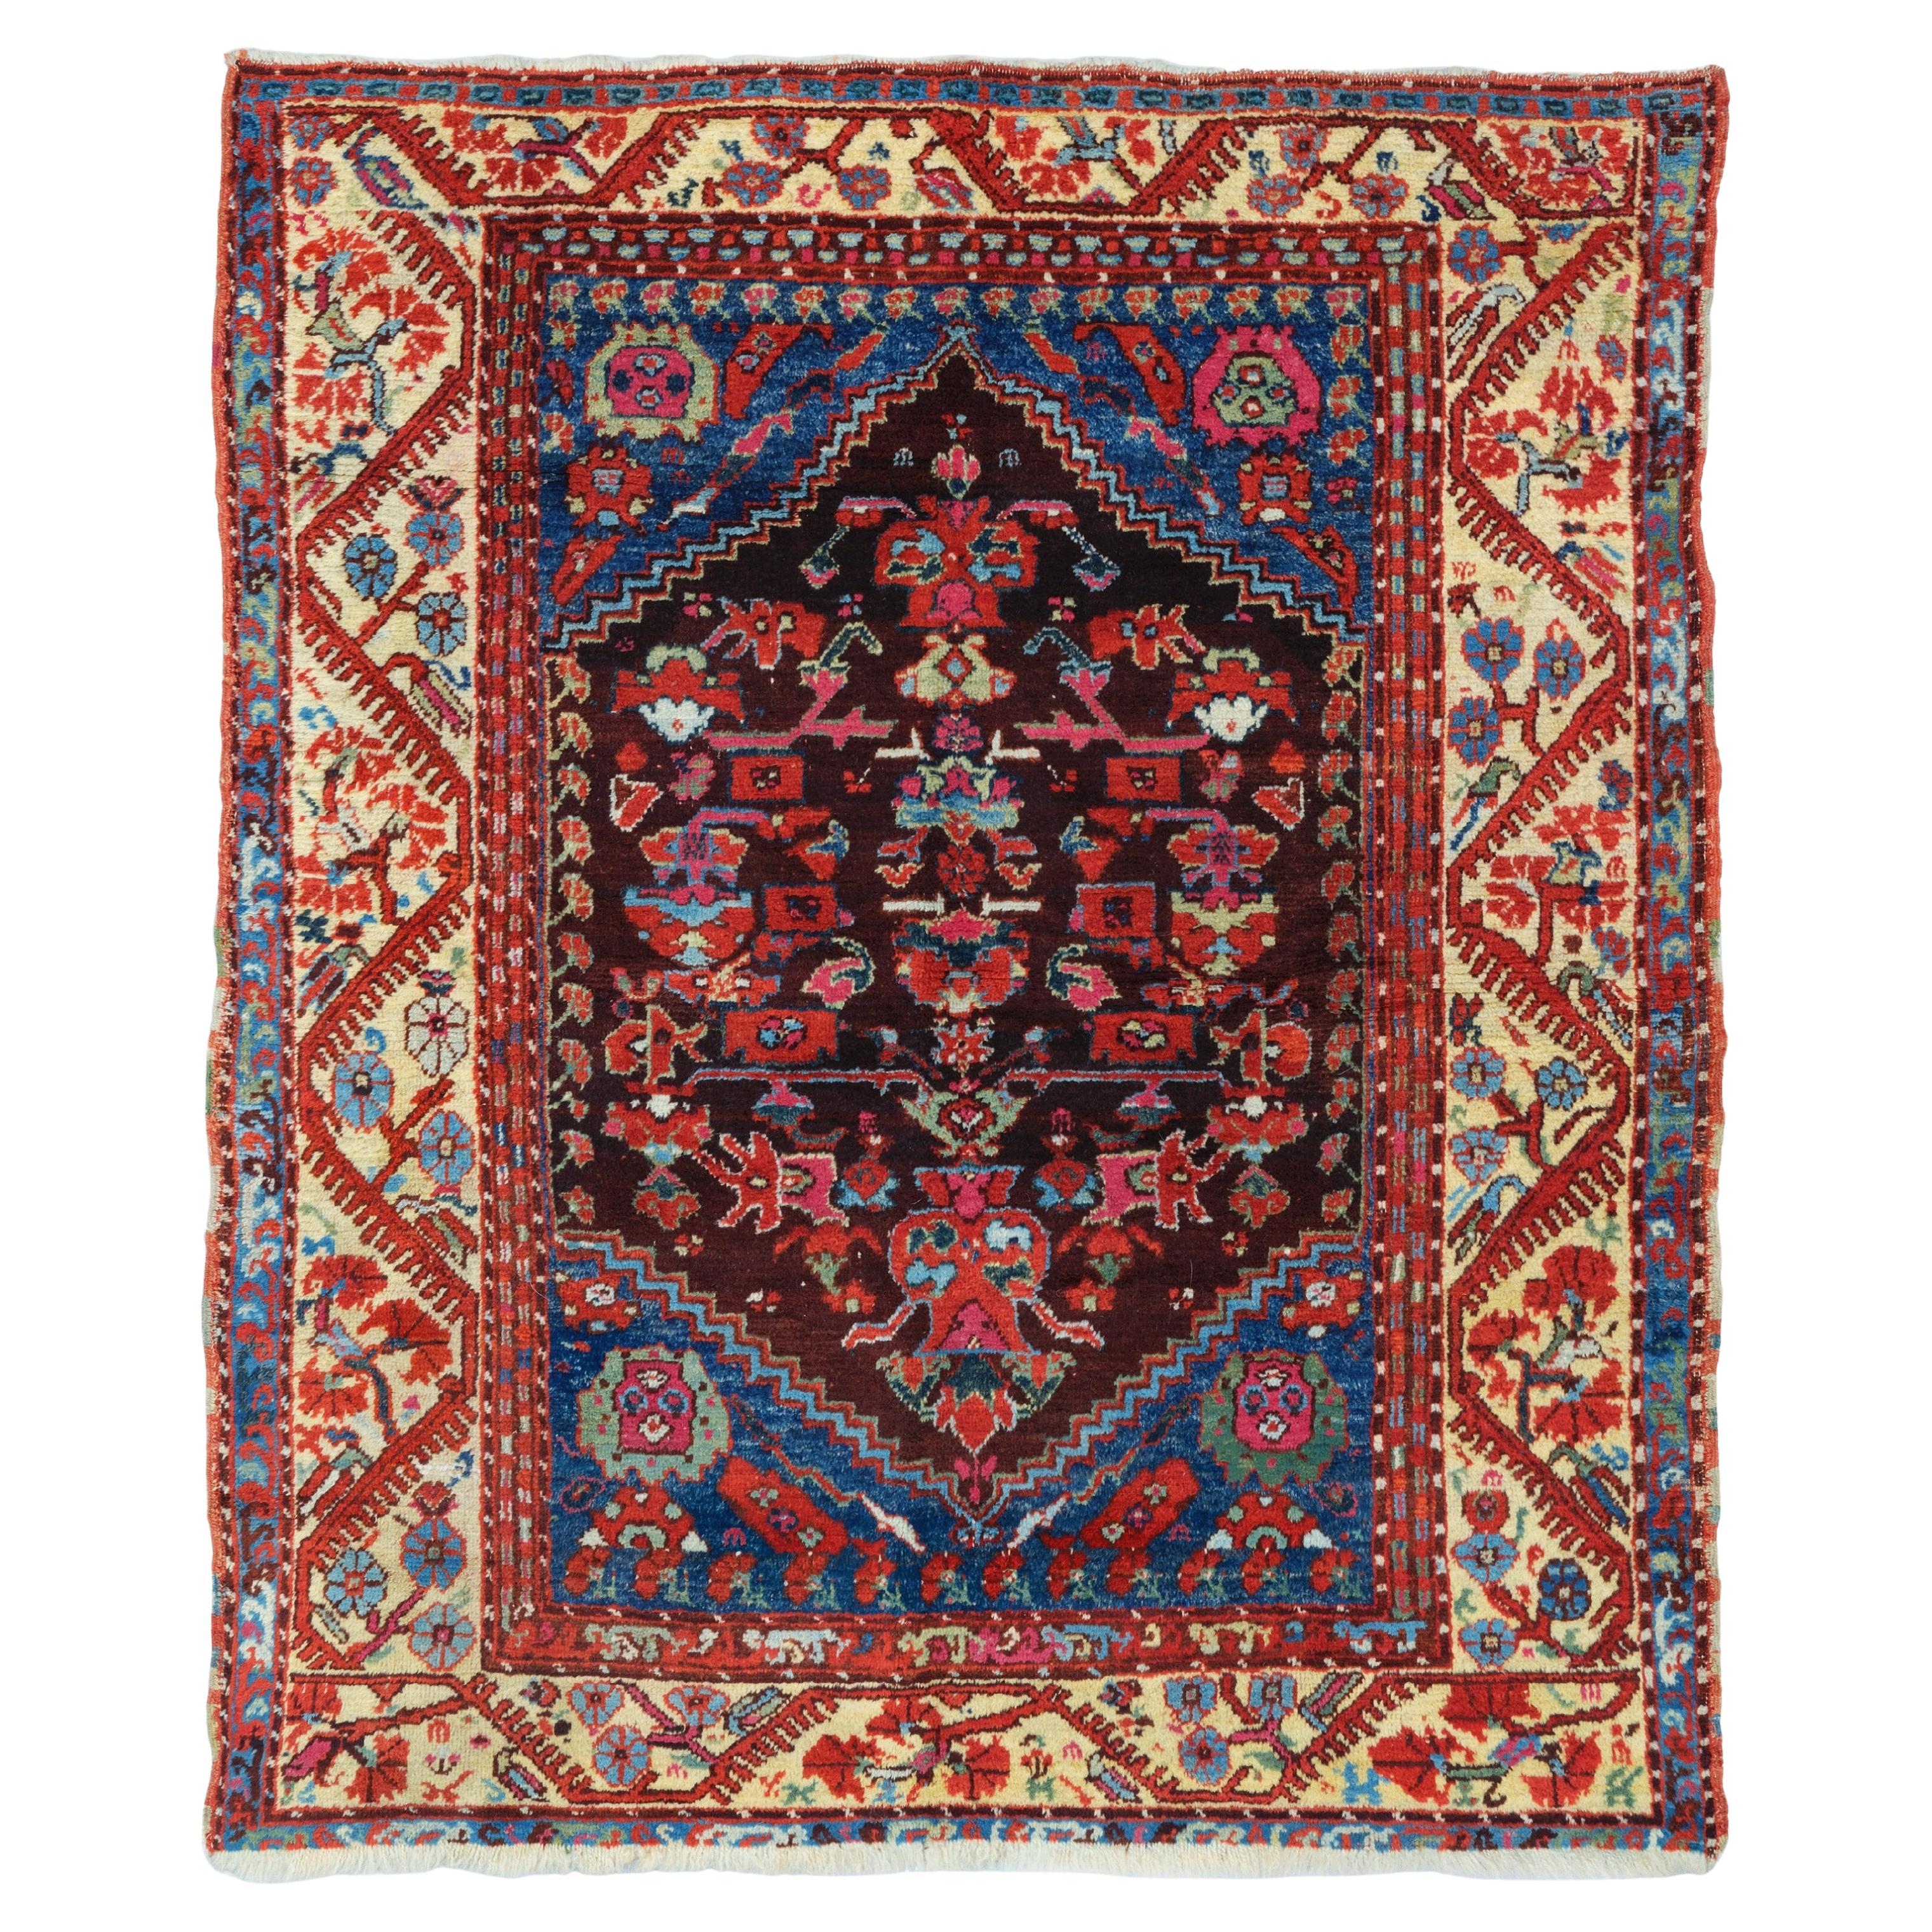 Middle Of The 19th Century Anatolian Kula Rug - Antique Turkish Rug For Sale